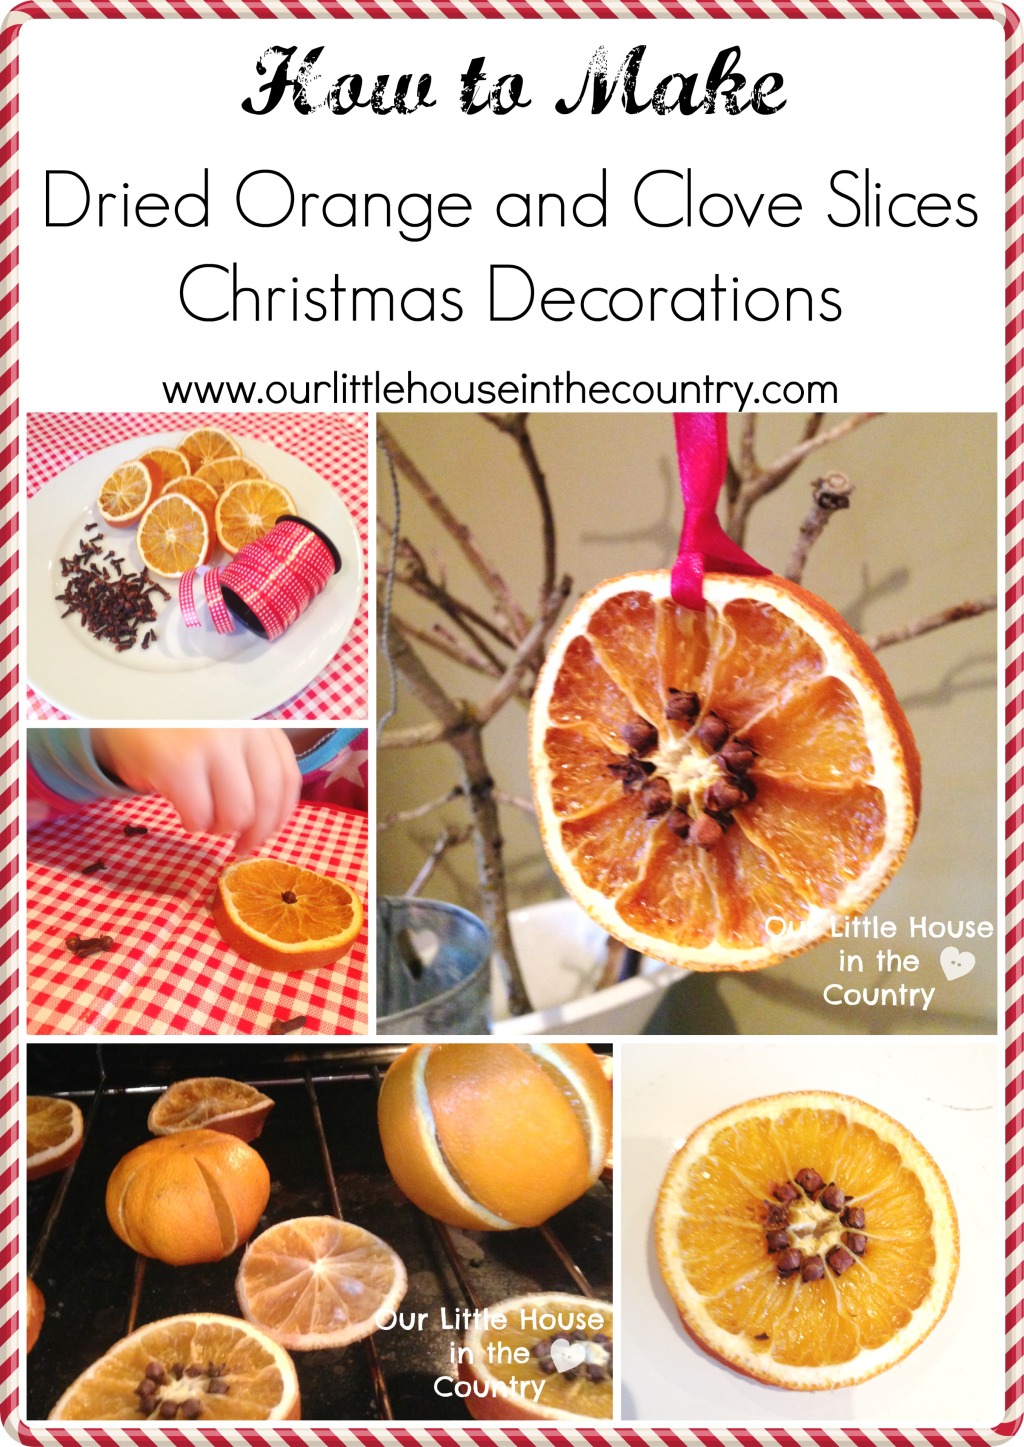 How to Make Dried Orange and Cloves Slices Christmas Decorations - Our Little House in the Country